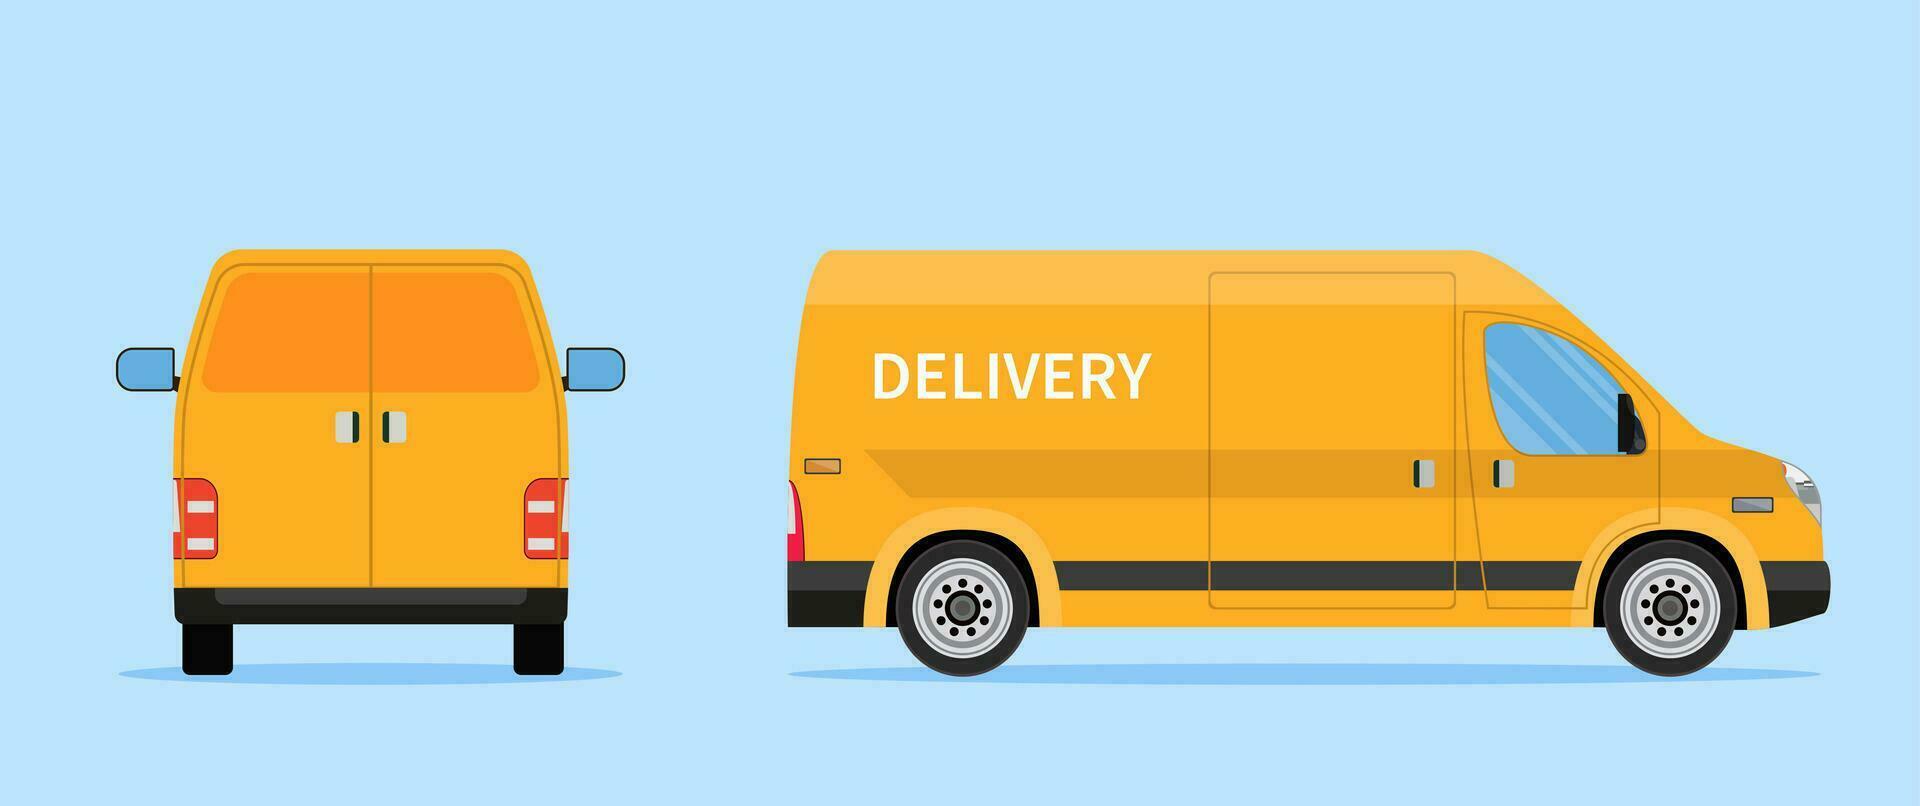 delivery truck van isolated on background. Online delivery service concept. delivery home and office. Vector illustration in flat style